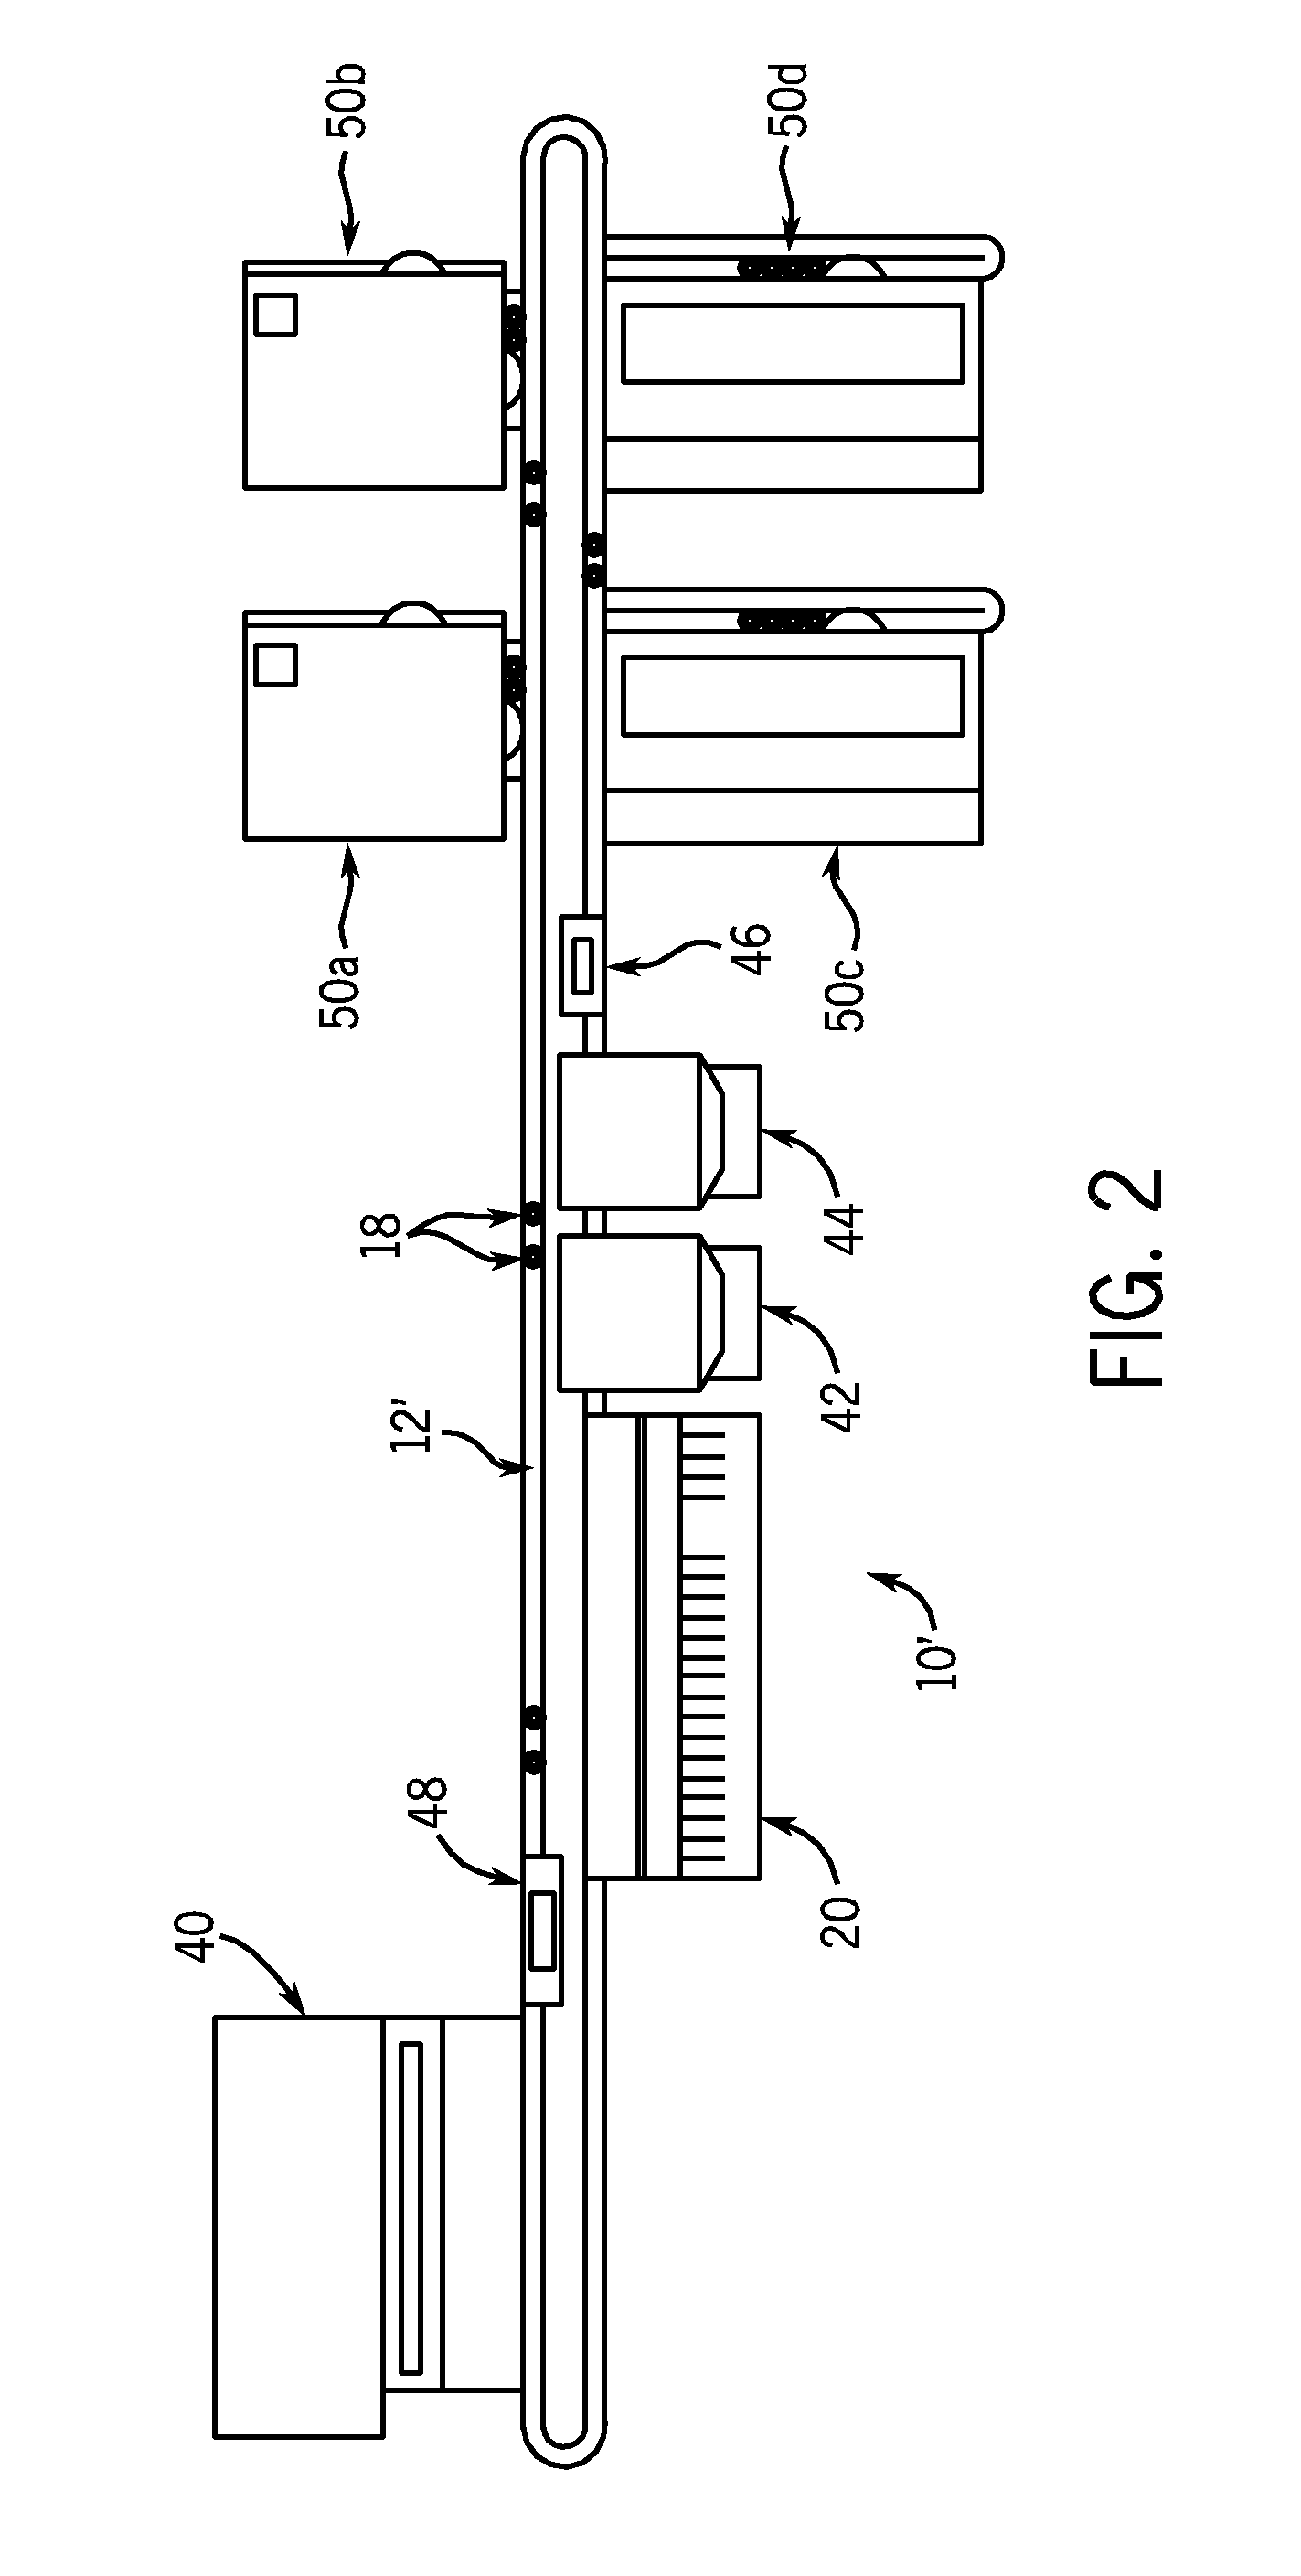 System for managing inventories of reagents